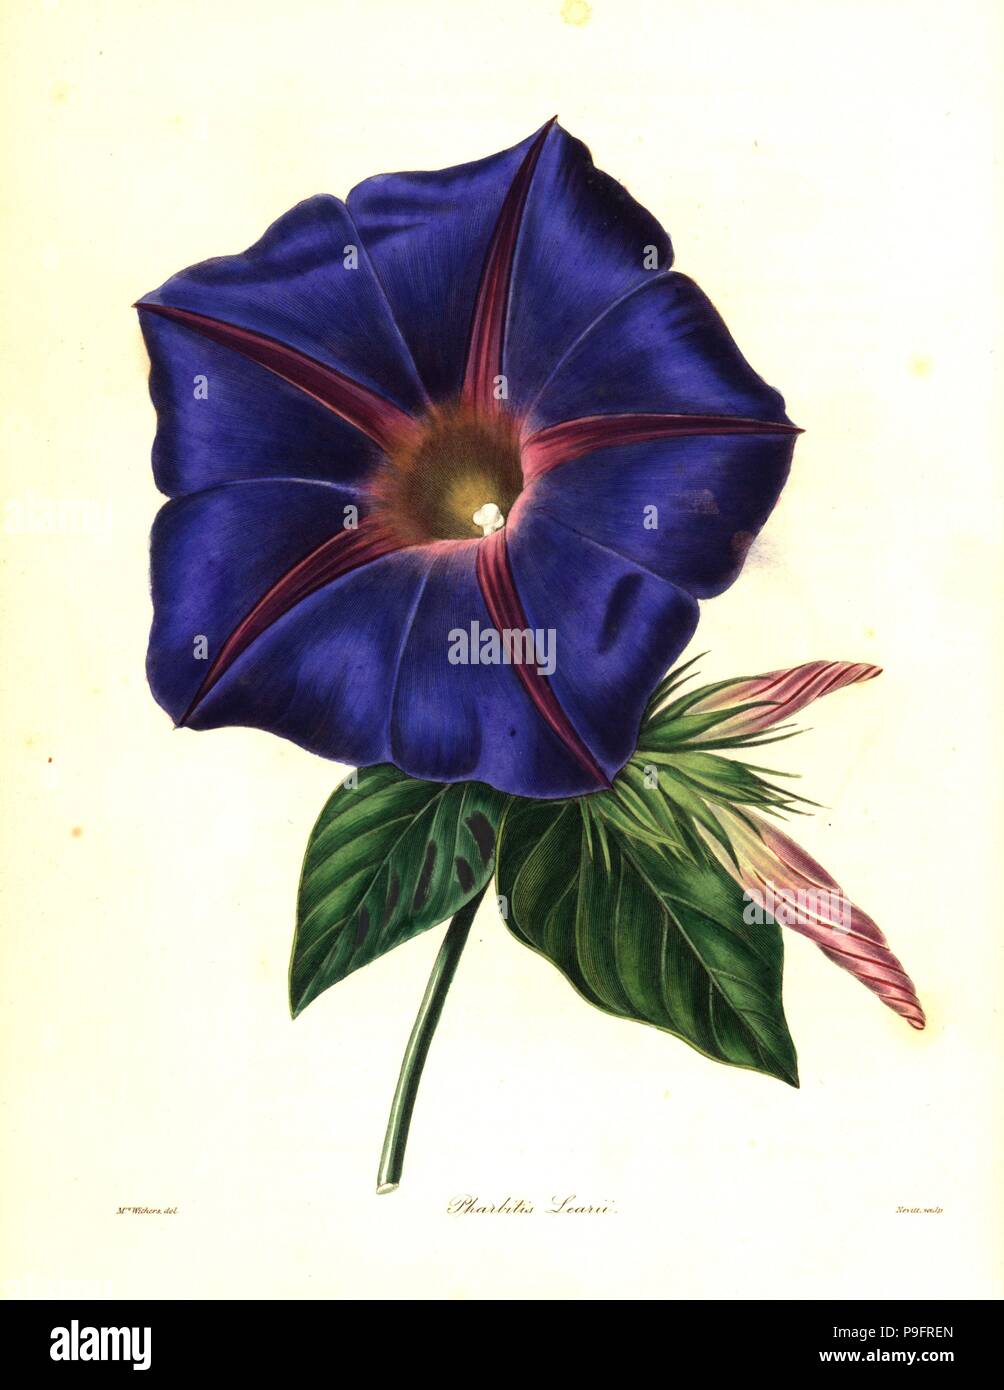 Blue morning glory, Ipomoea indica (Pharbitis learii). Handcoloured copperplate engraving by S. Nevitt after a botanical illustration by Mrs Augusta Withers from Benjamin Maund and the Rev. John Stevens Henslow's The Botanist, London, 1836. Stock Photo